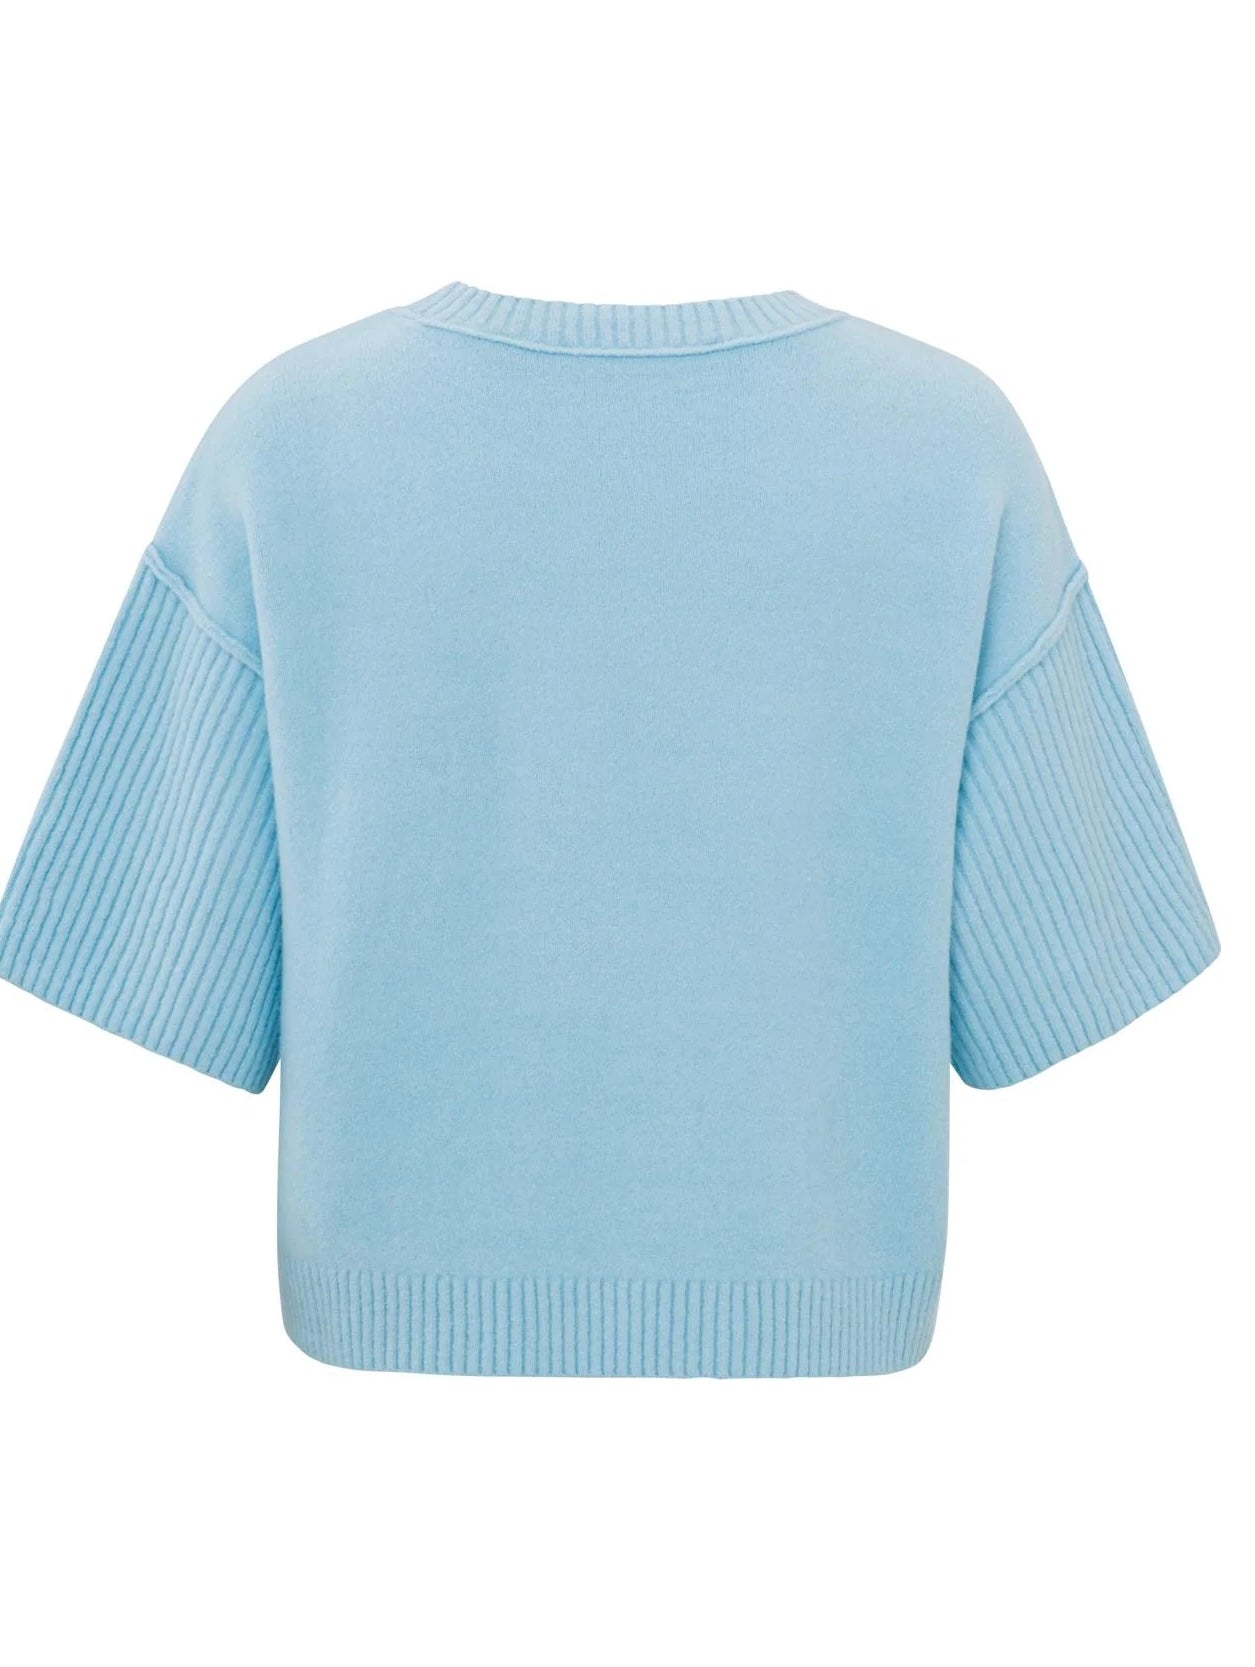 Yaya Sweater with boatneck, wide half long sleeves in boxy fit Blue